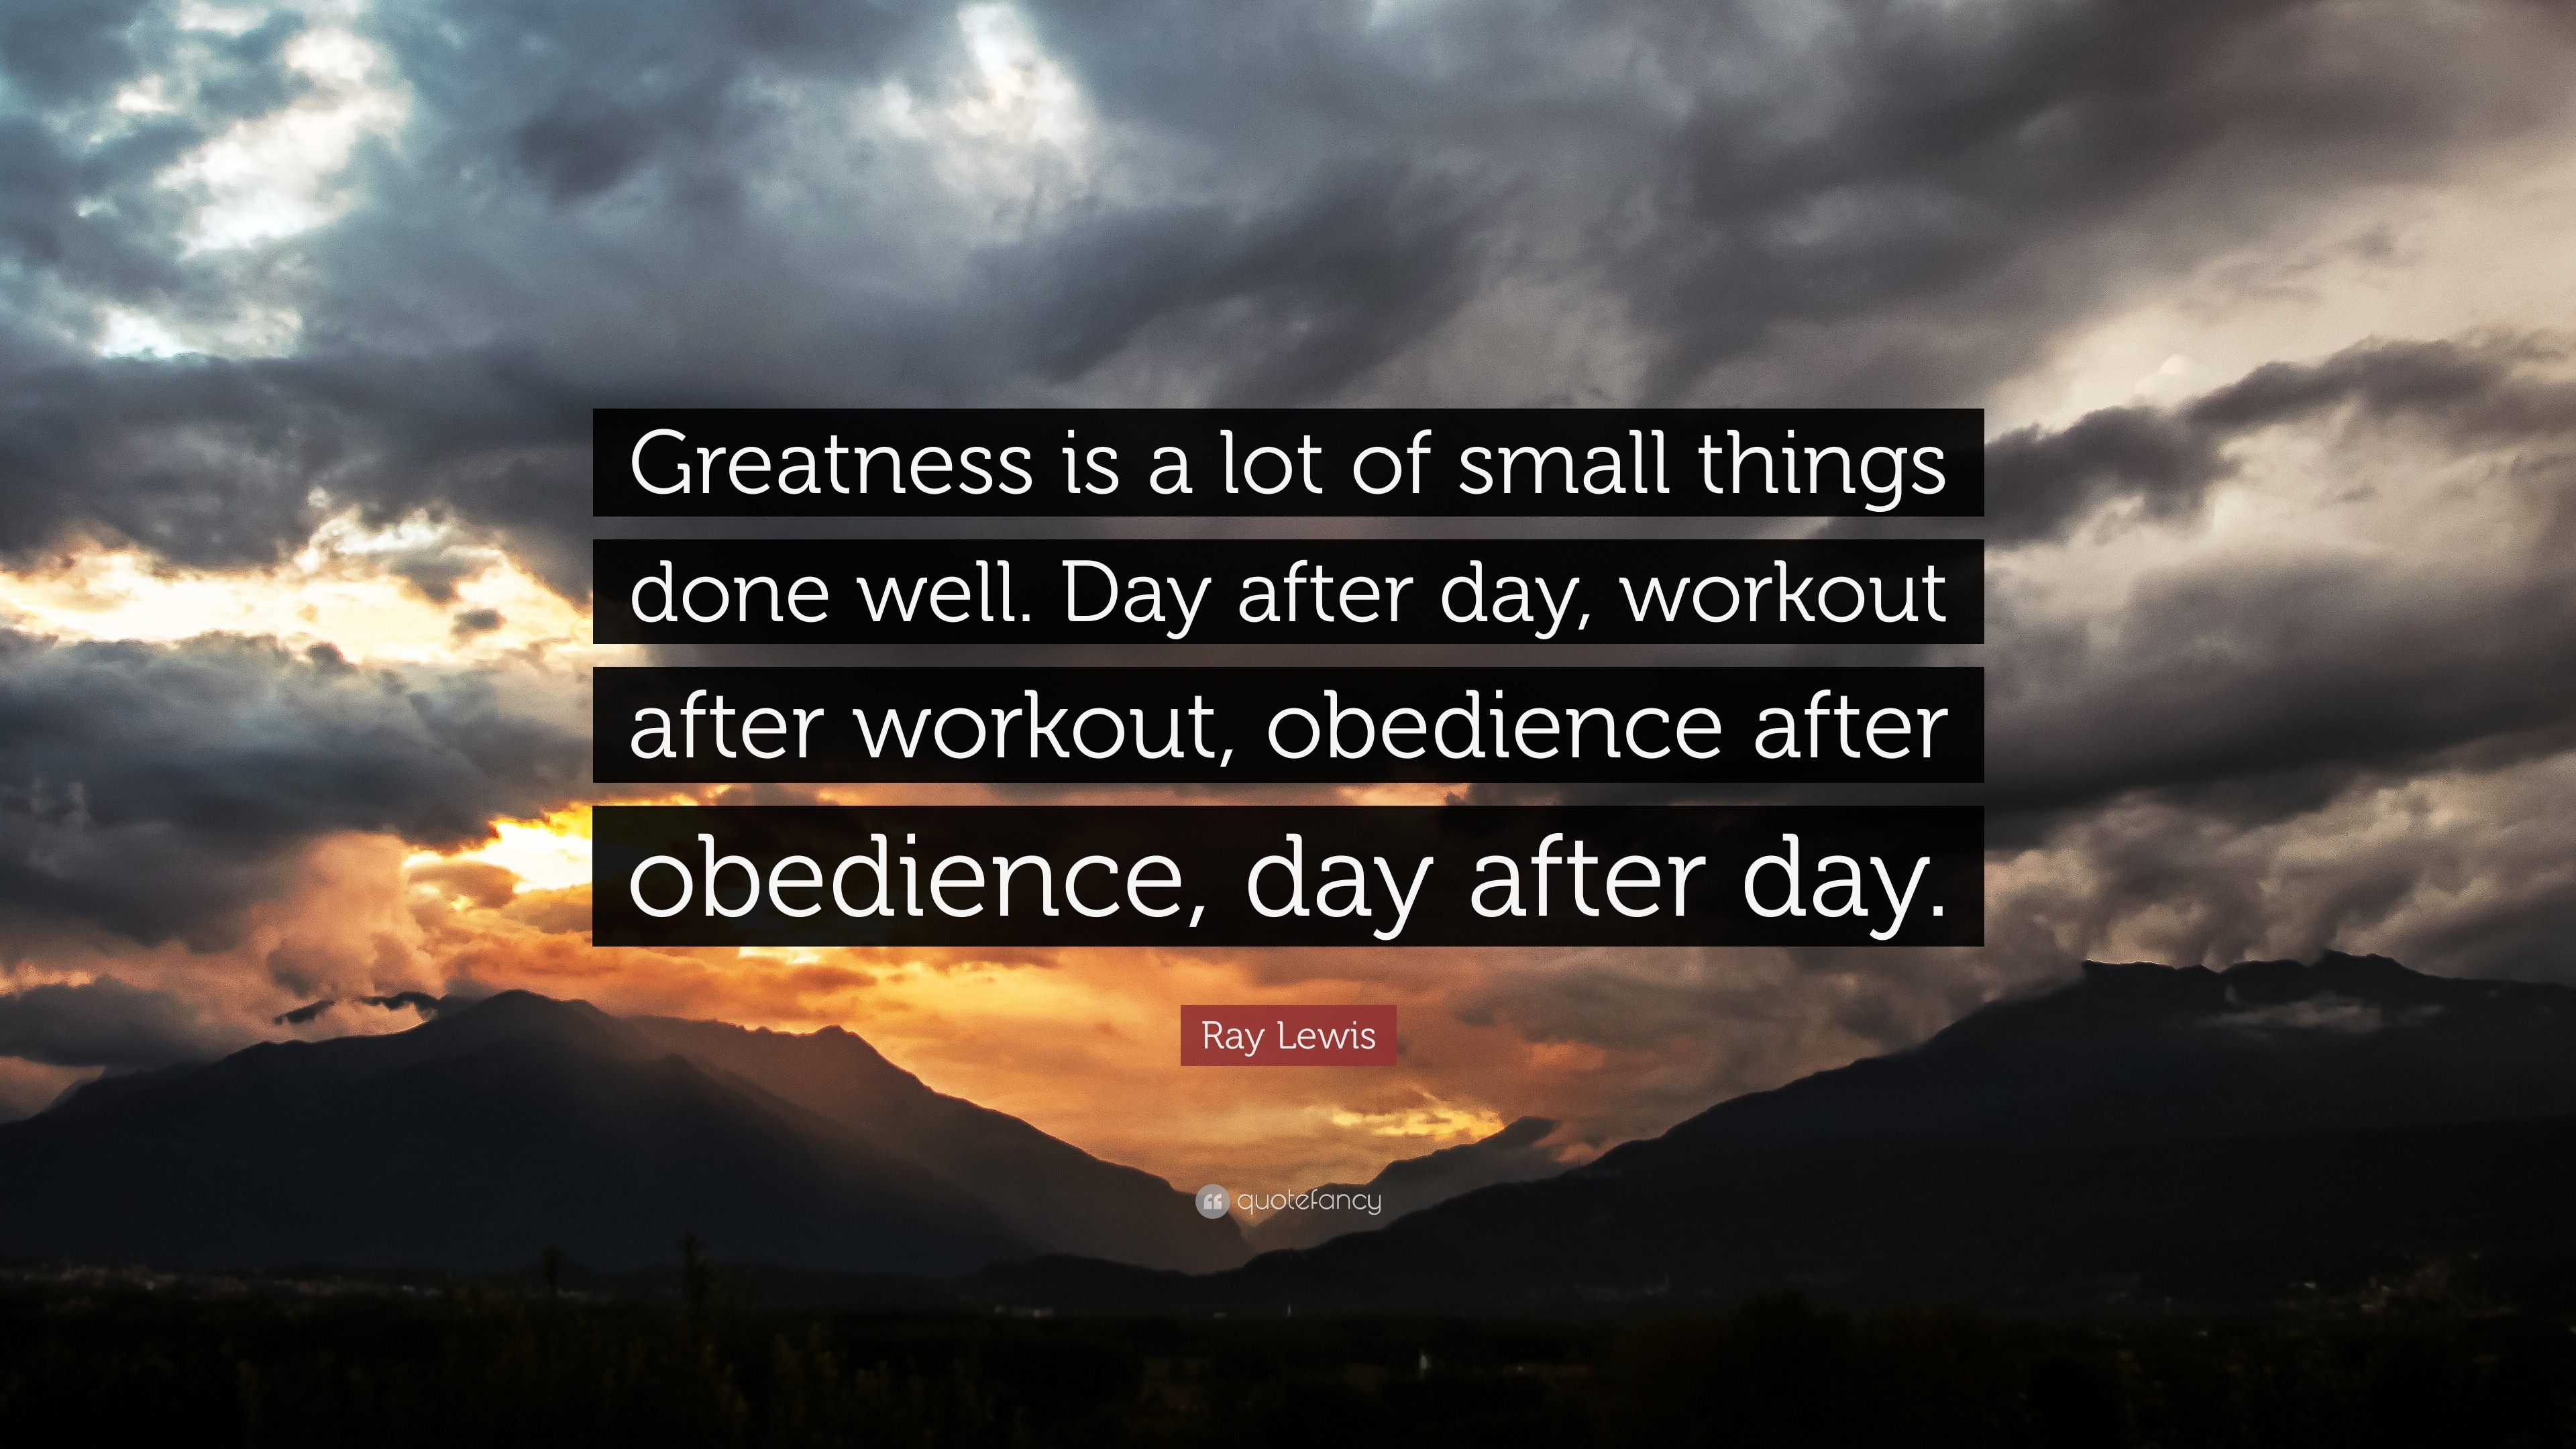 Greatness Is a Lot of Small Things Done Well” (via Ray Lewis)